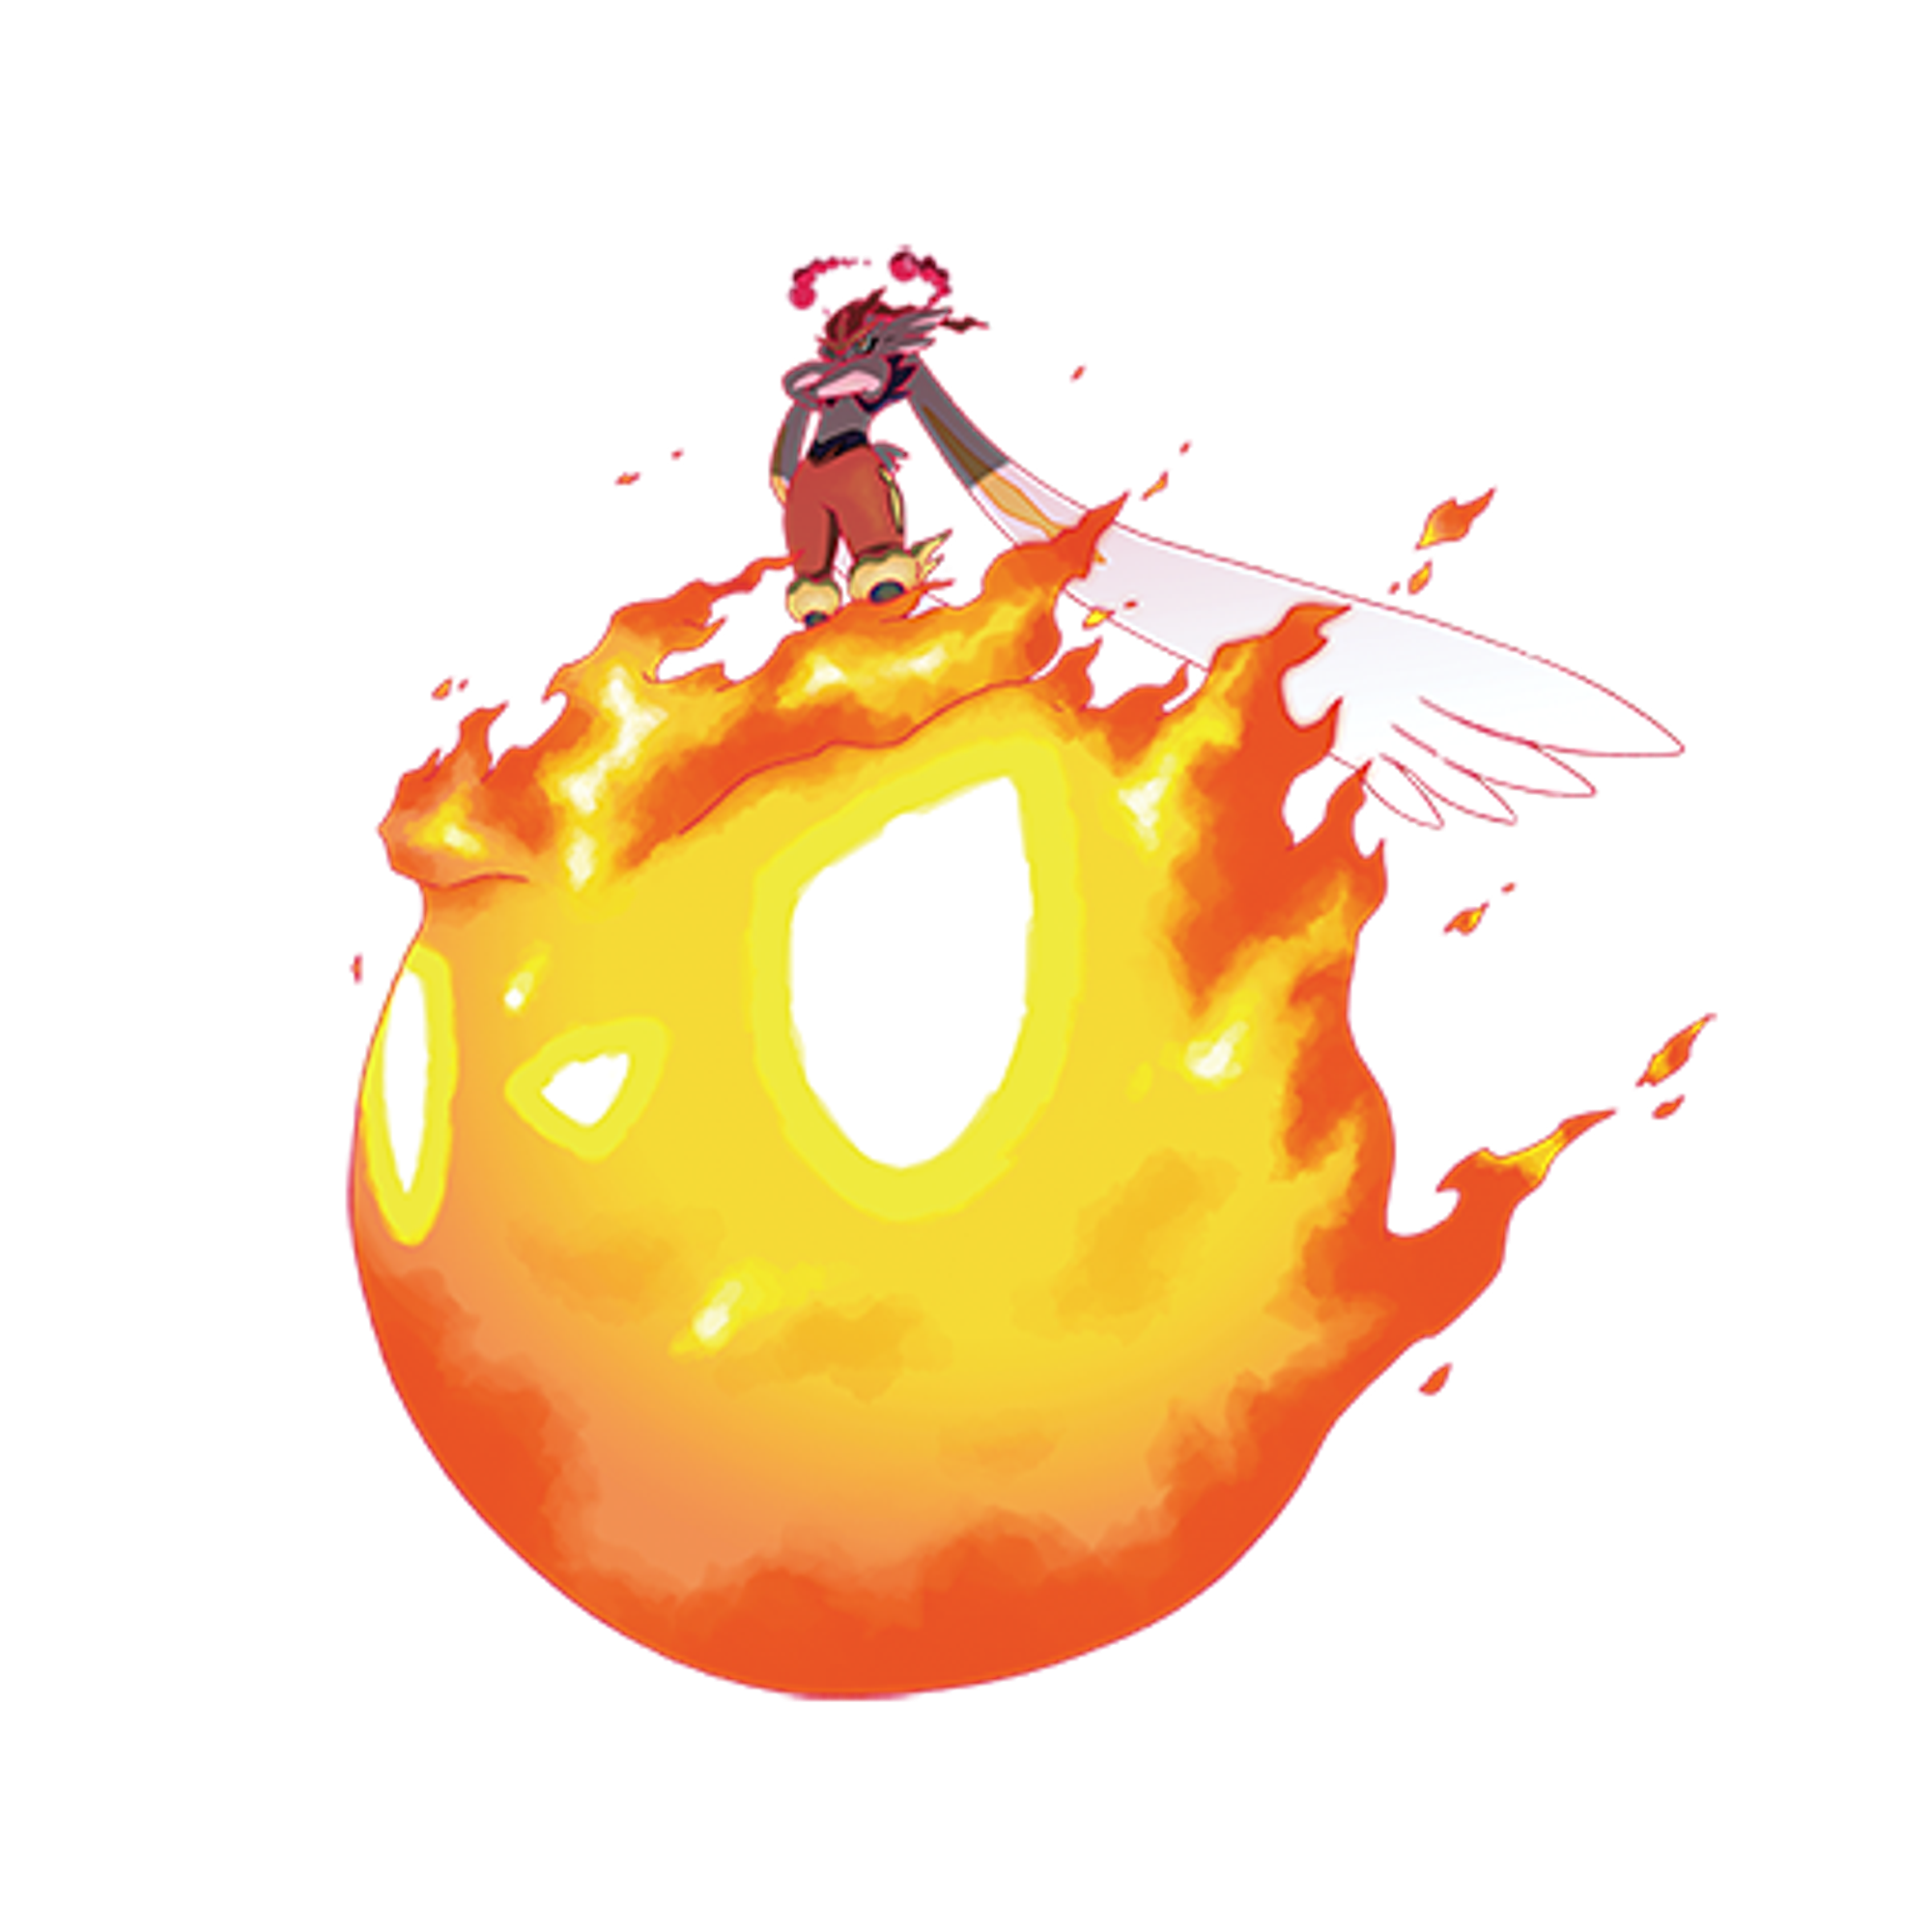 Infused with Cinderace’s fighting spirit, the gigantic Pyro Ball never miss...